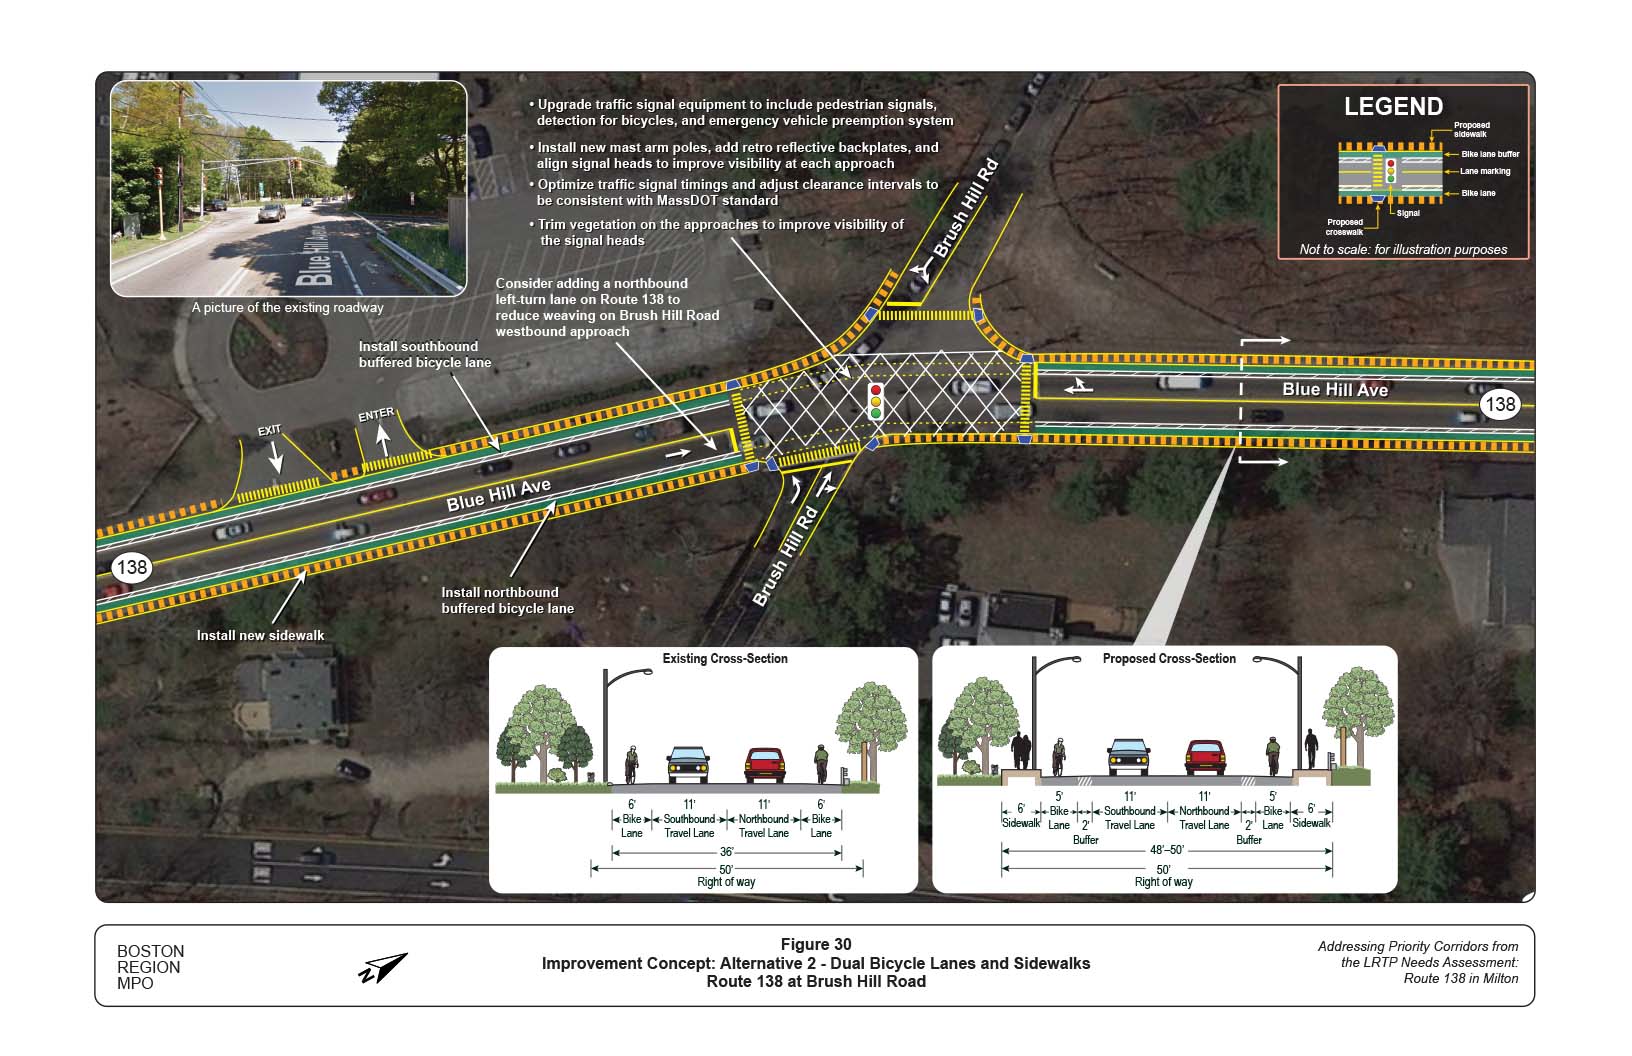 Figure 30 is an aerial photo of Route 138 at Brush Hill Road showing Alternative 2, dual bicycle lanes and sidewalks, and overlays showing the existing and proposed cross-sections.